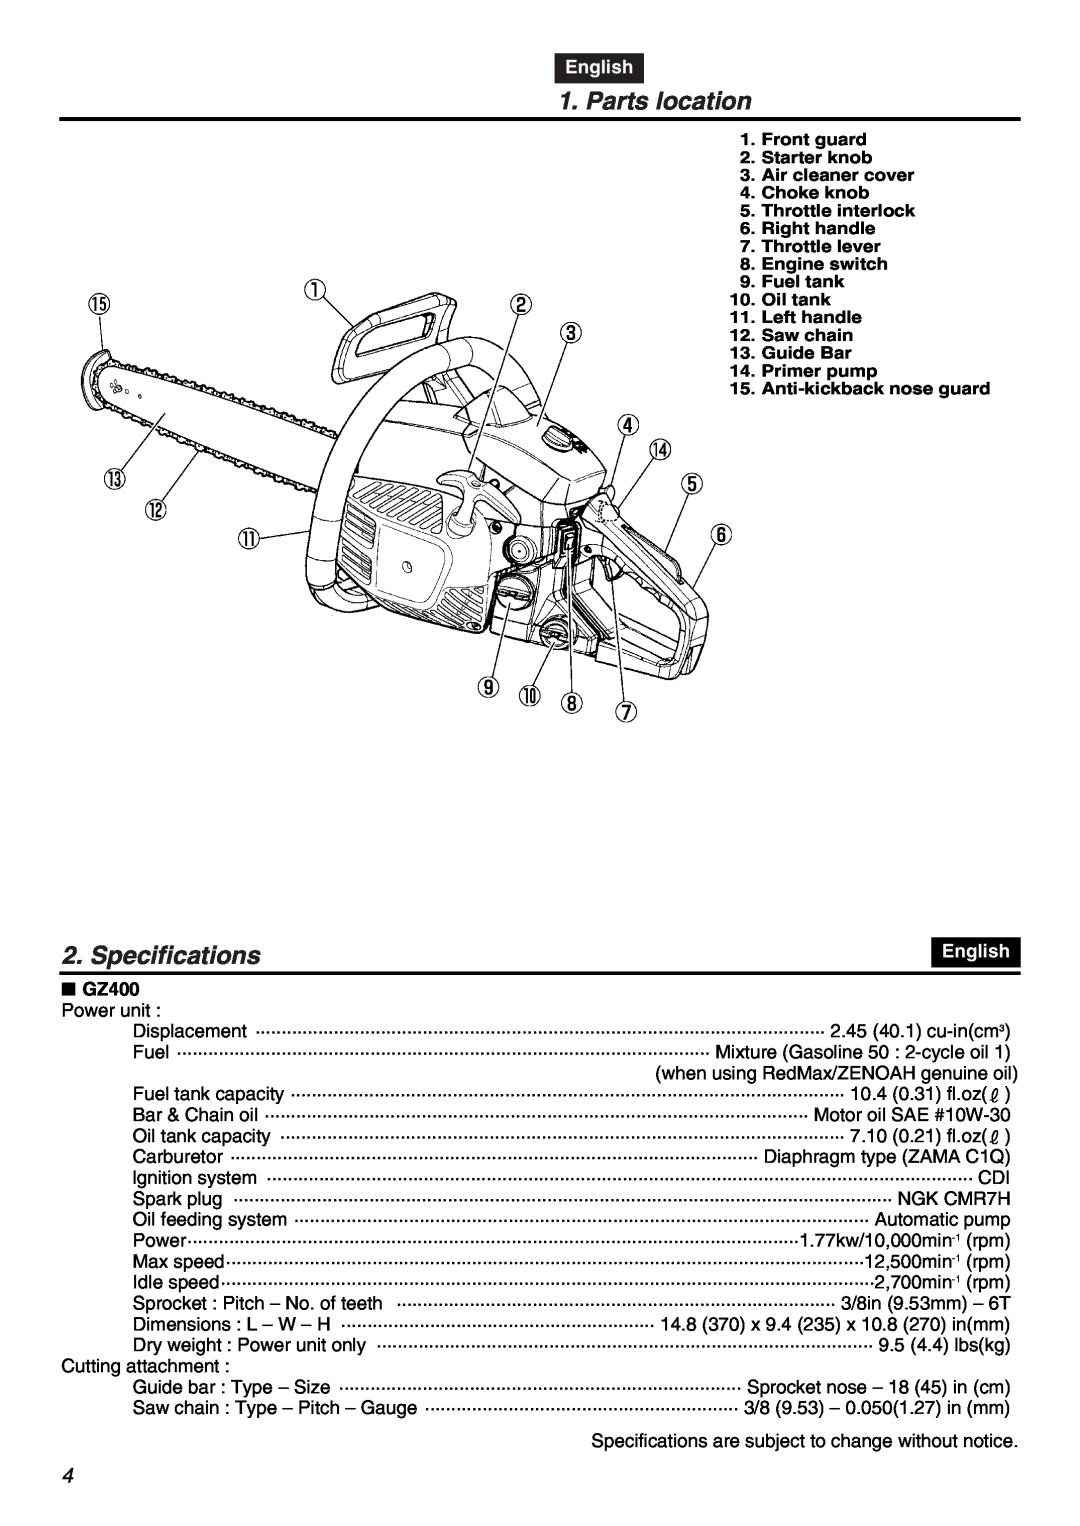 RedMax GZ400 manual Parts location, Specifications, English 